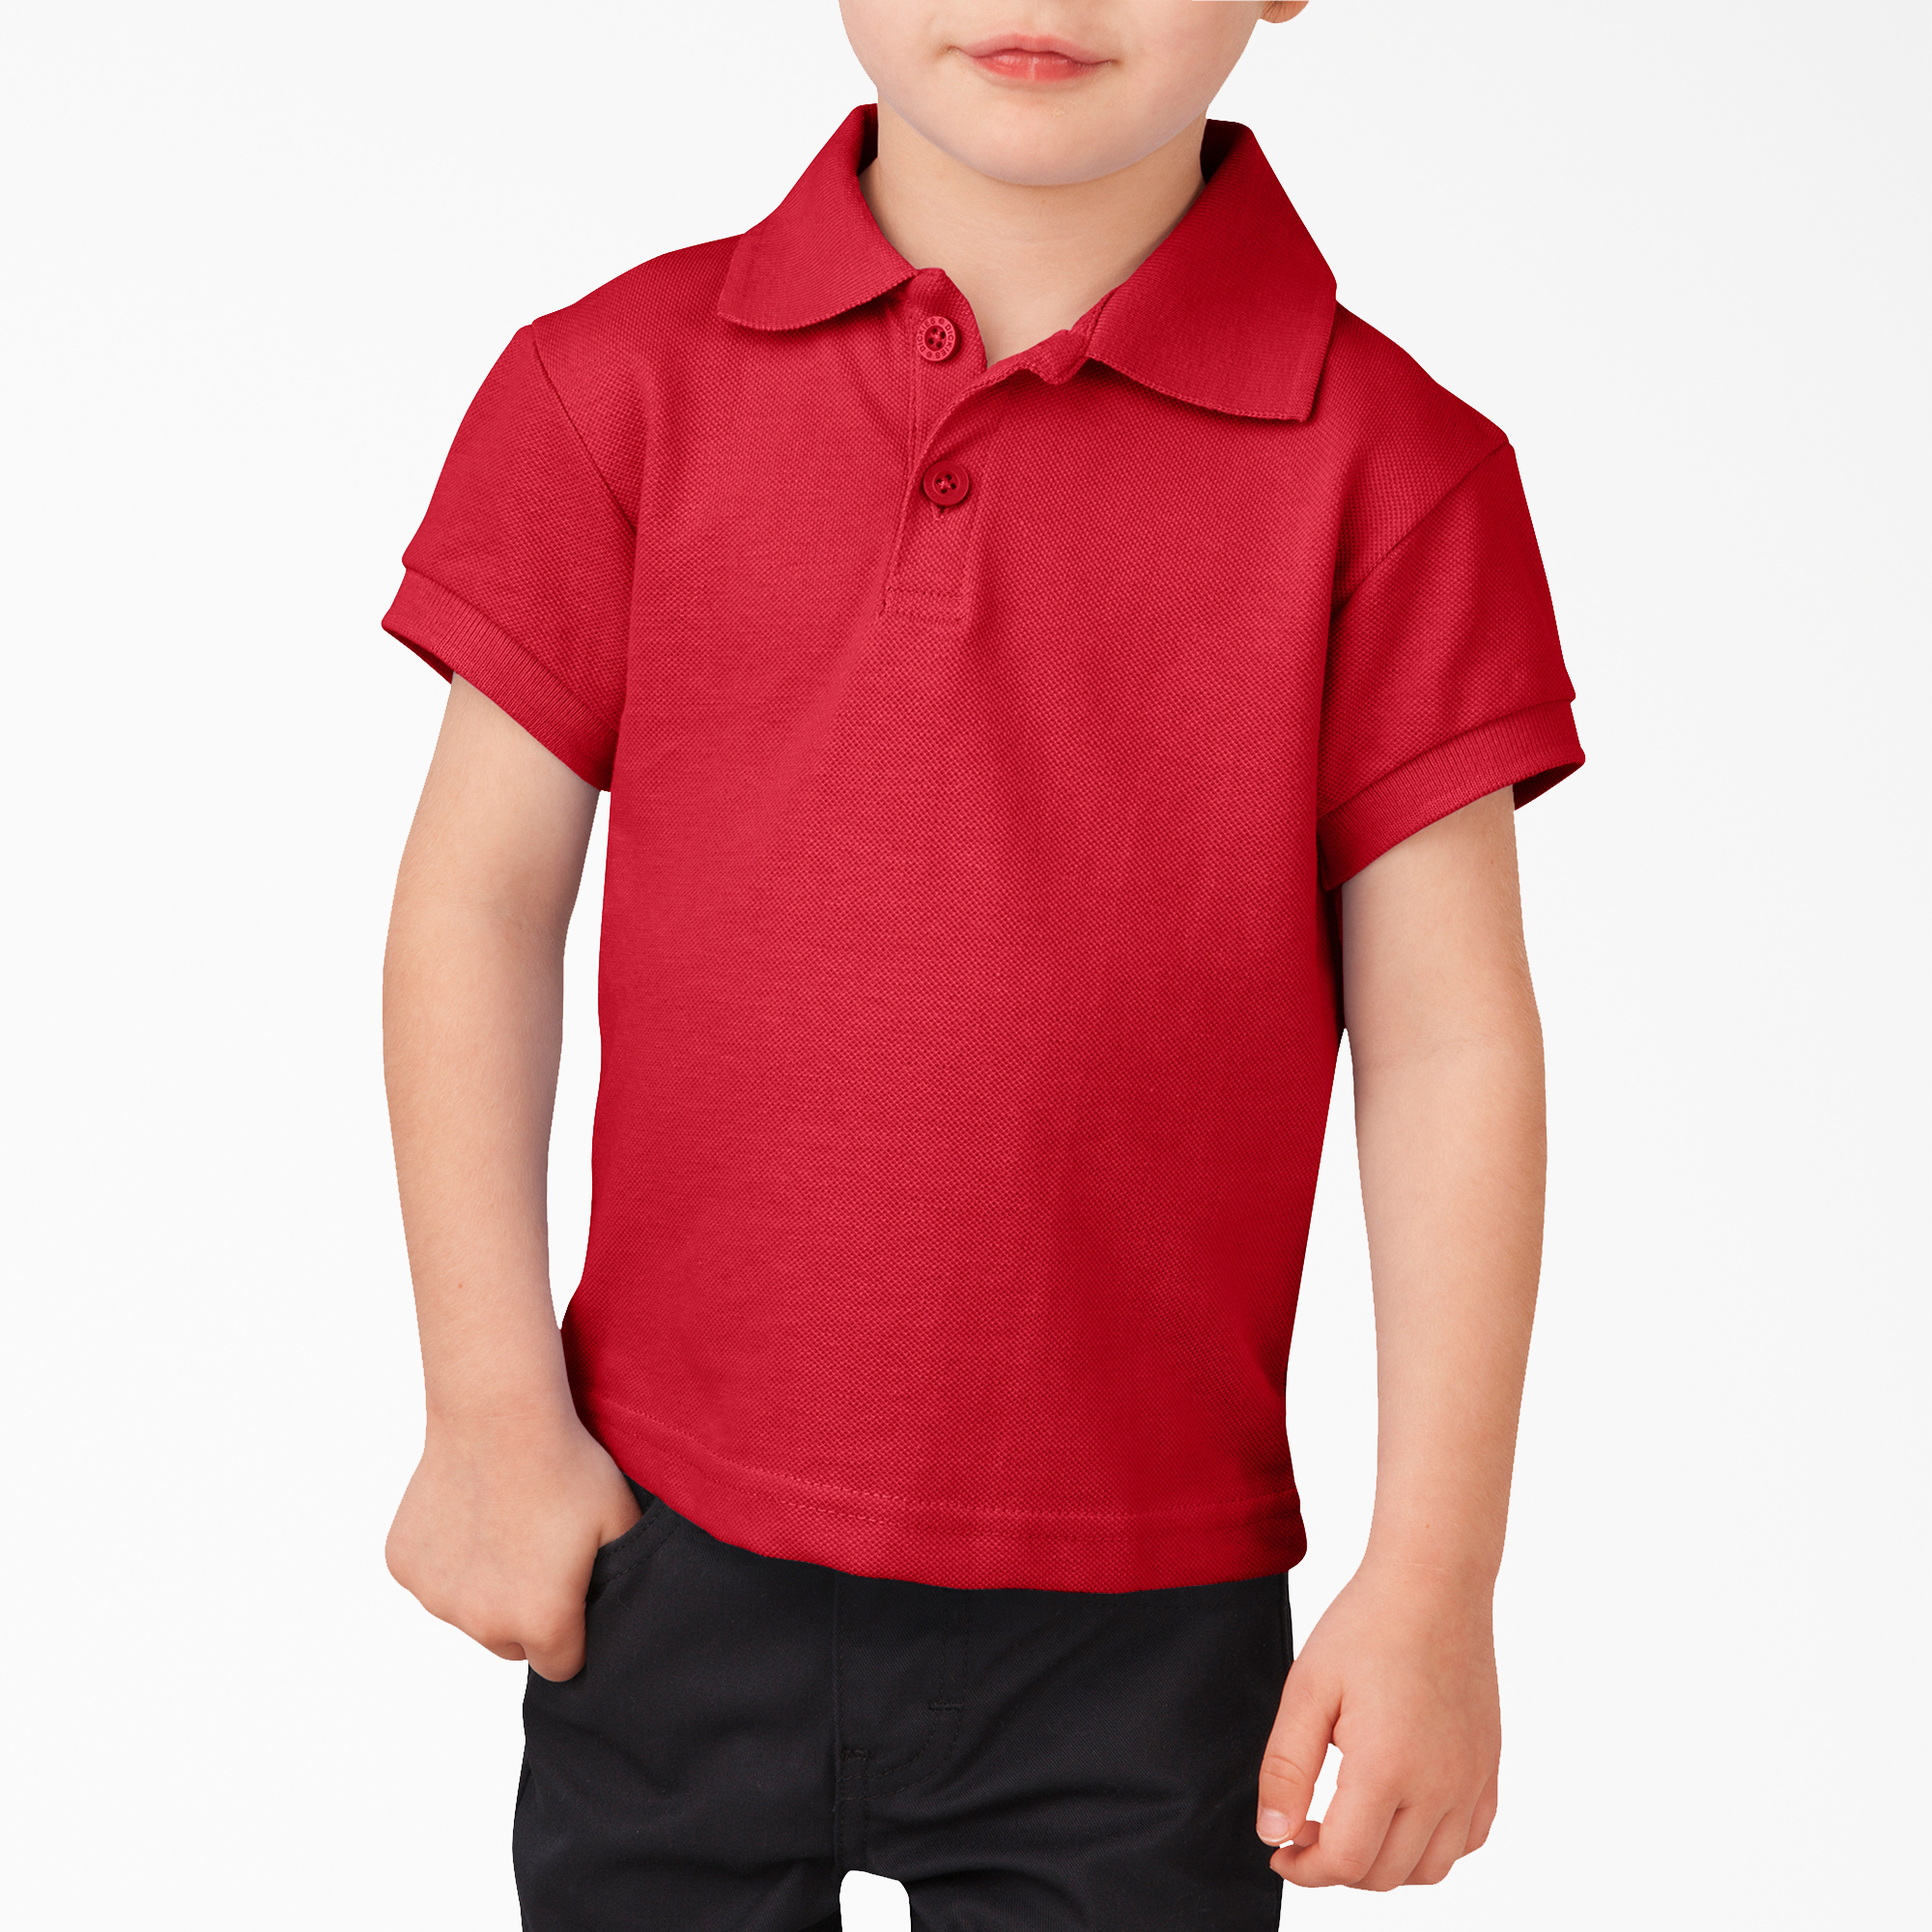 red pants for toddlers